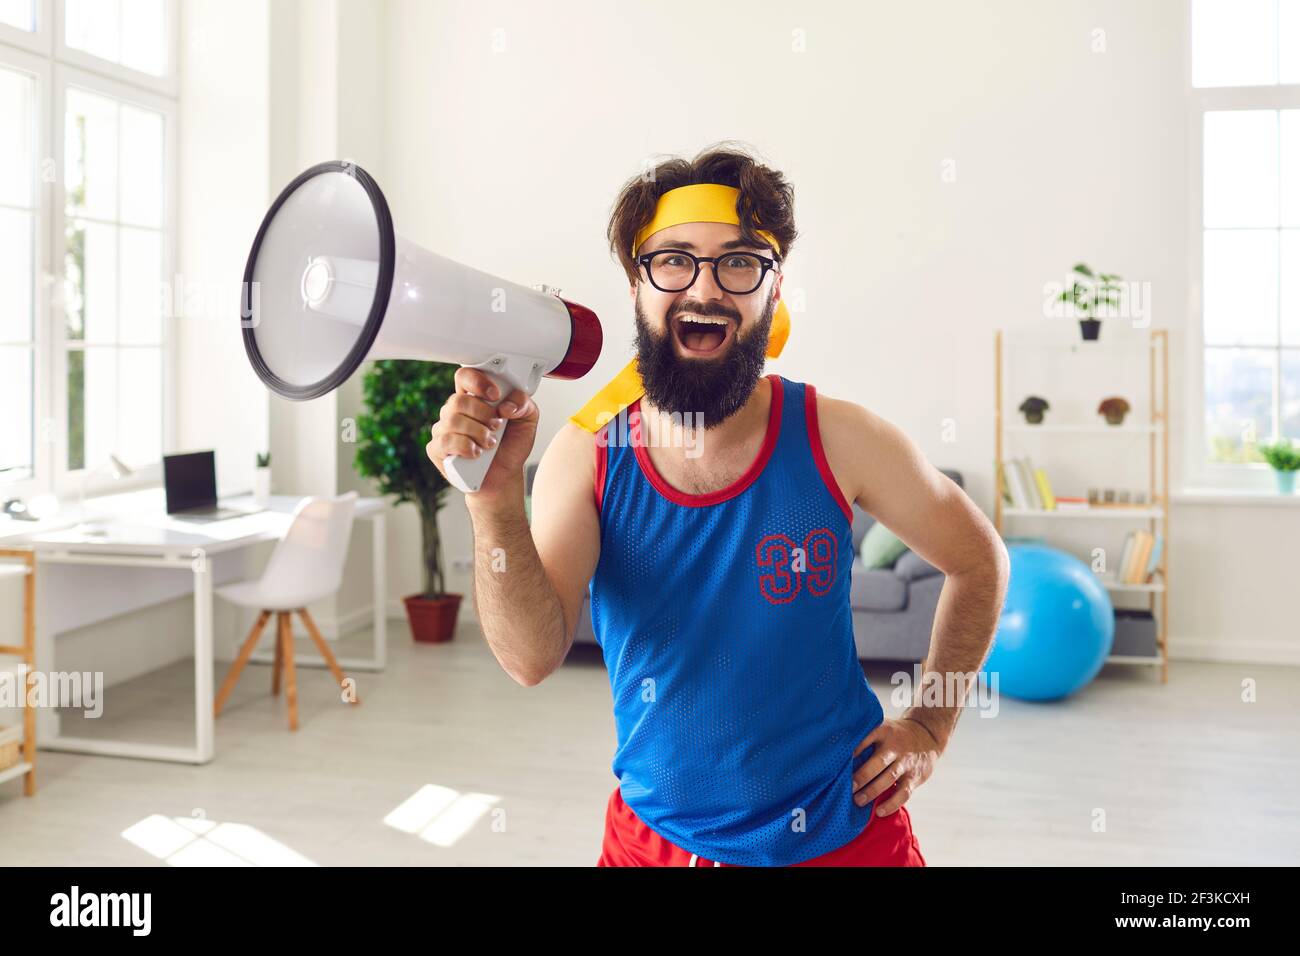 Athlete with a crazy expression is dressed in bright comic clothes shouting into a loudspeaker. Stock Photo